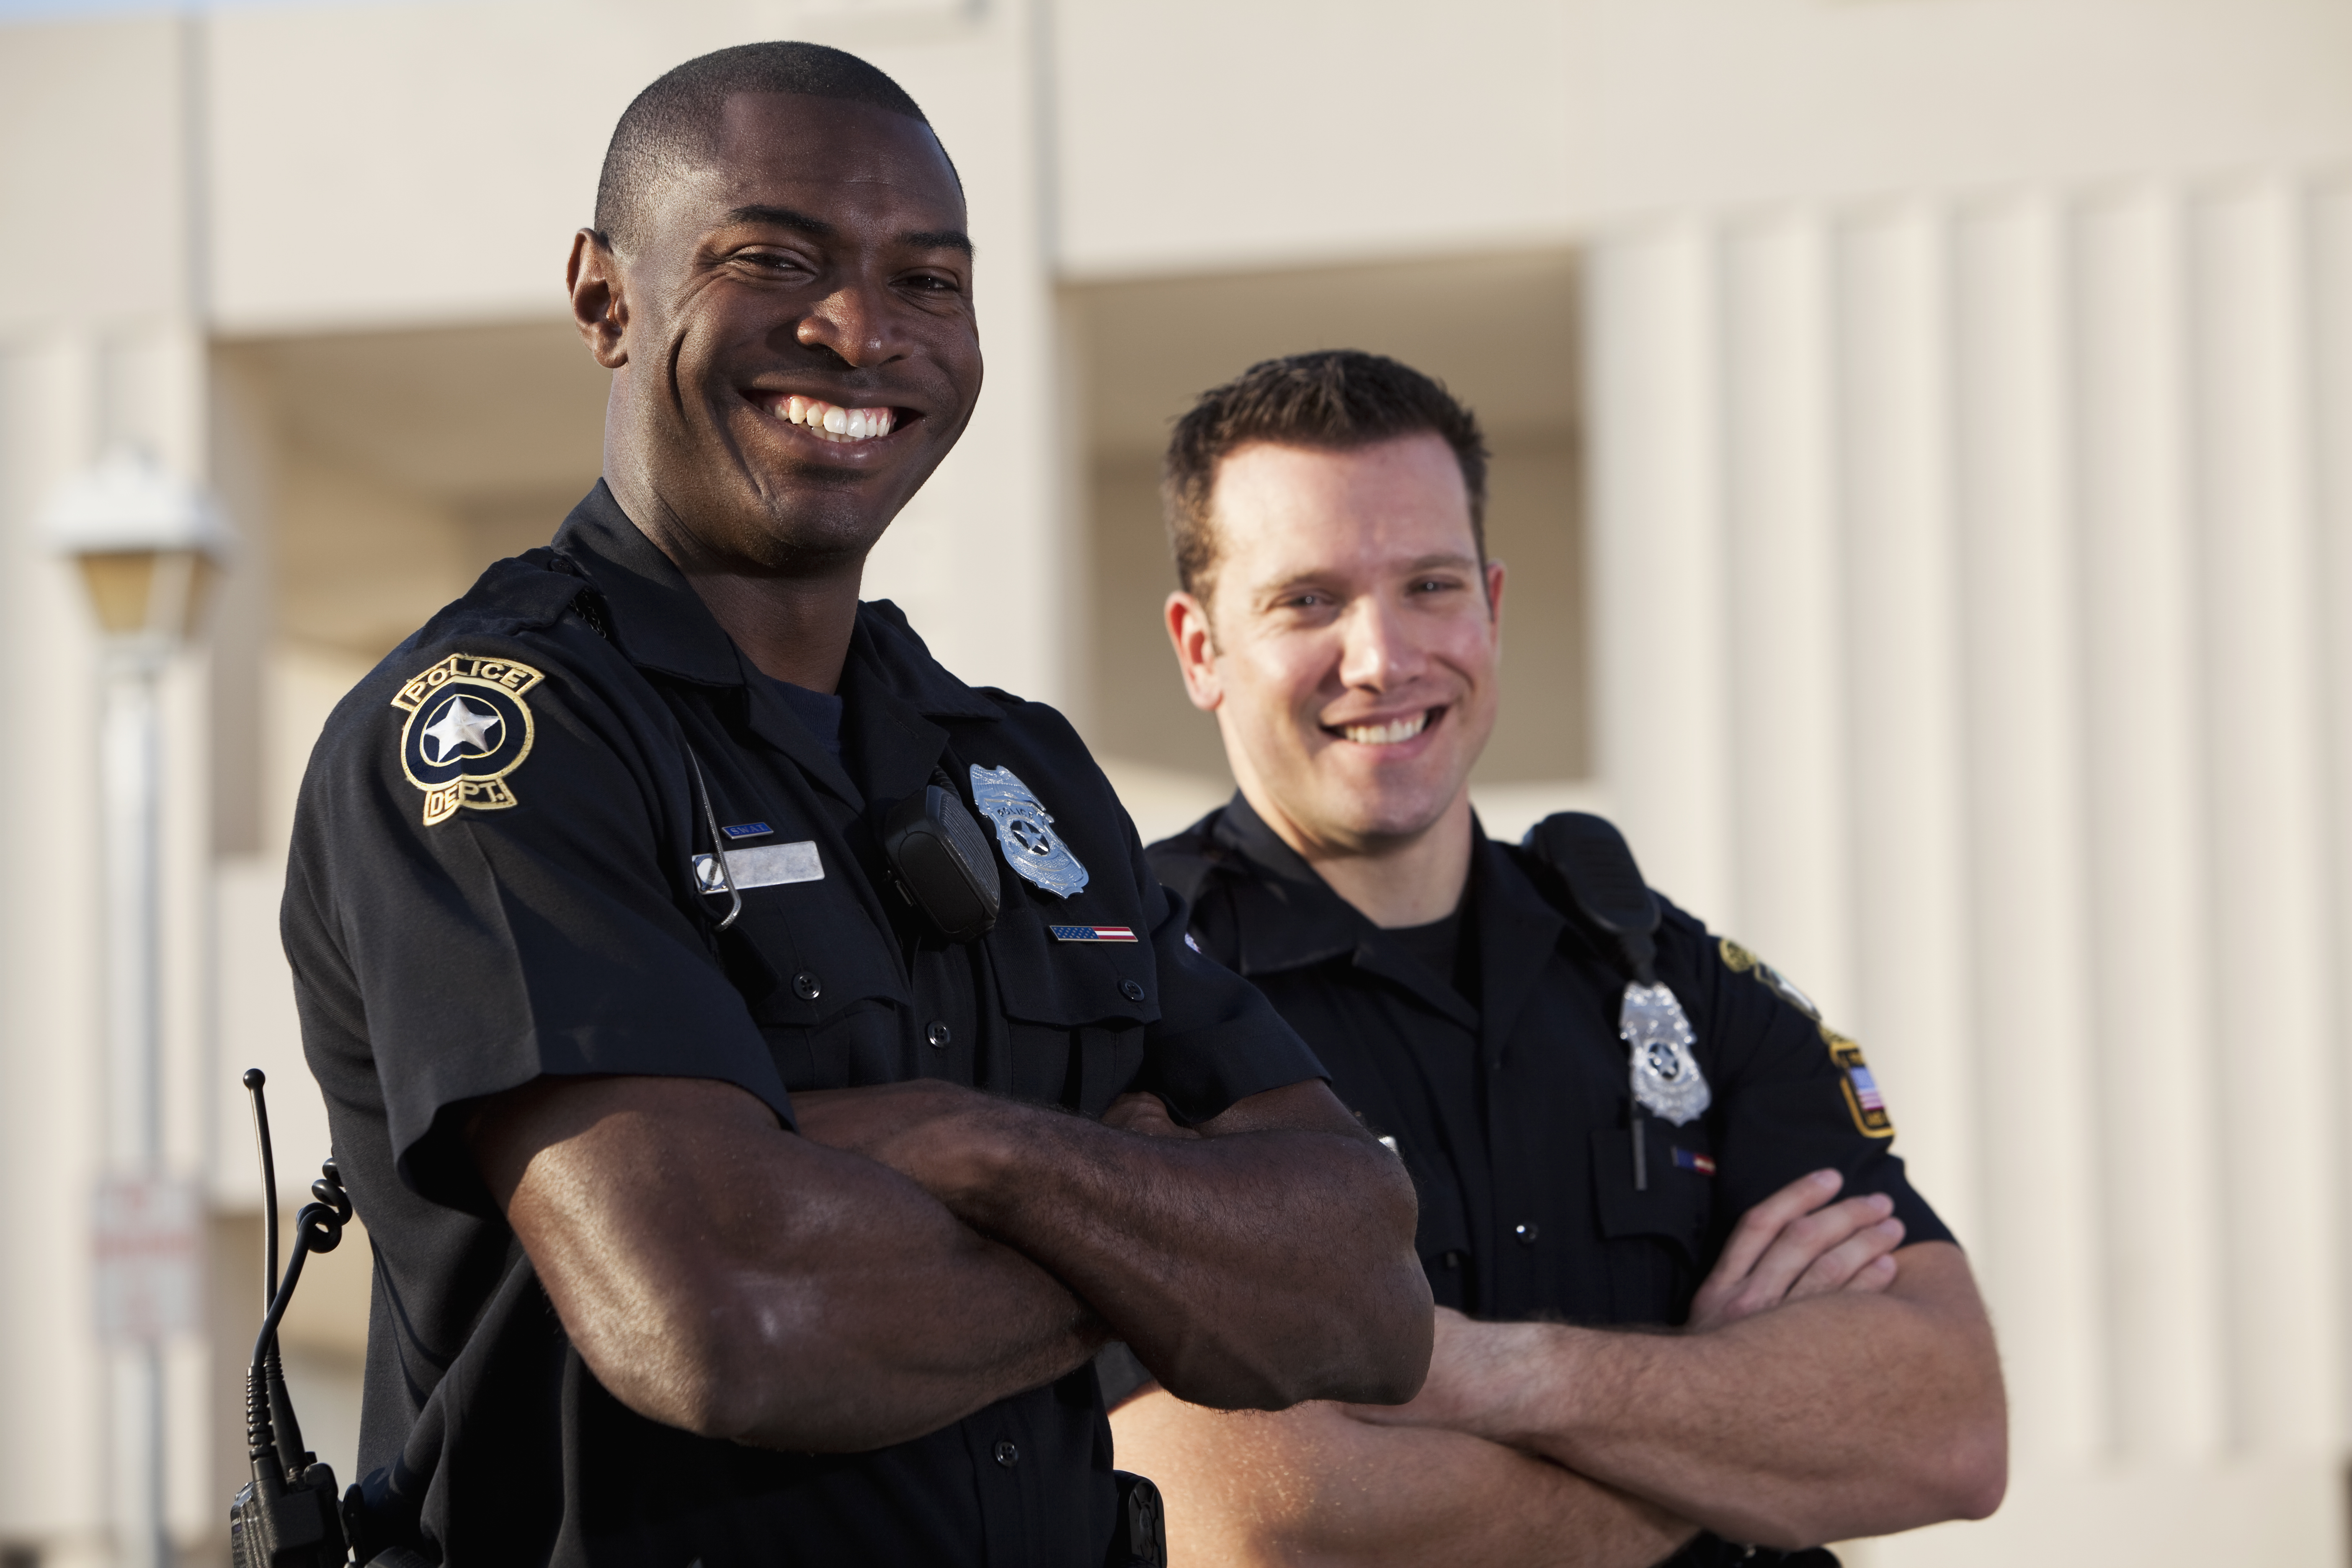 Texas A&M University-Commerce Launches Competency-Based Criminal Justice Program Designed for Police Officers, Law Enforcement.